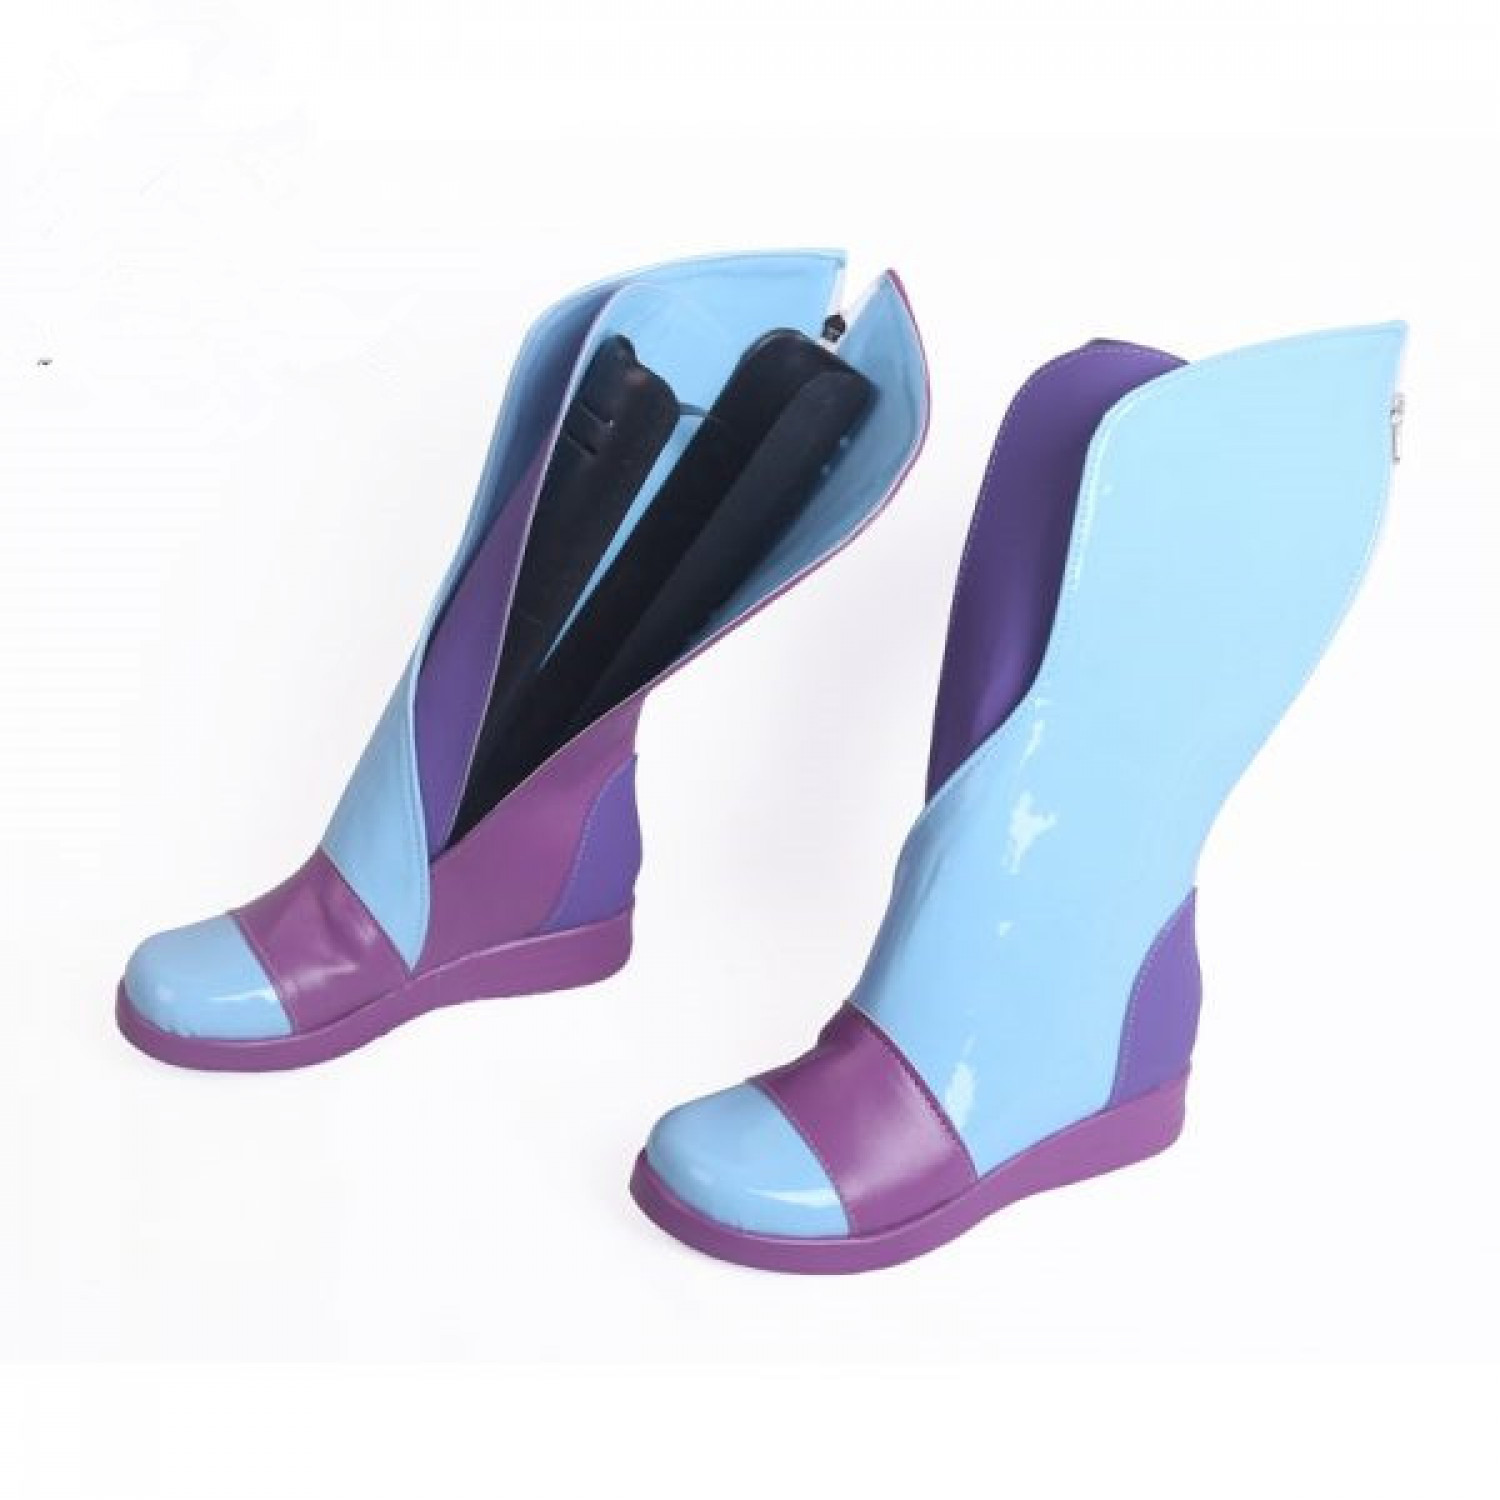 She Ra Princess of Power Glimmer Cosplay Shoes free shipping - $59.99